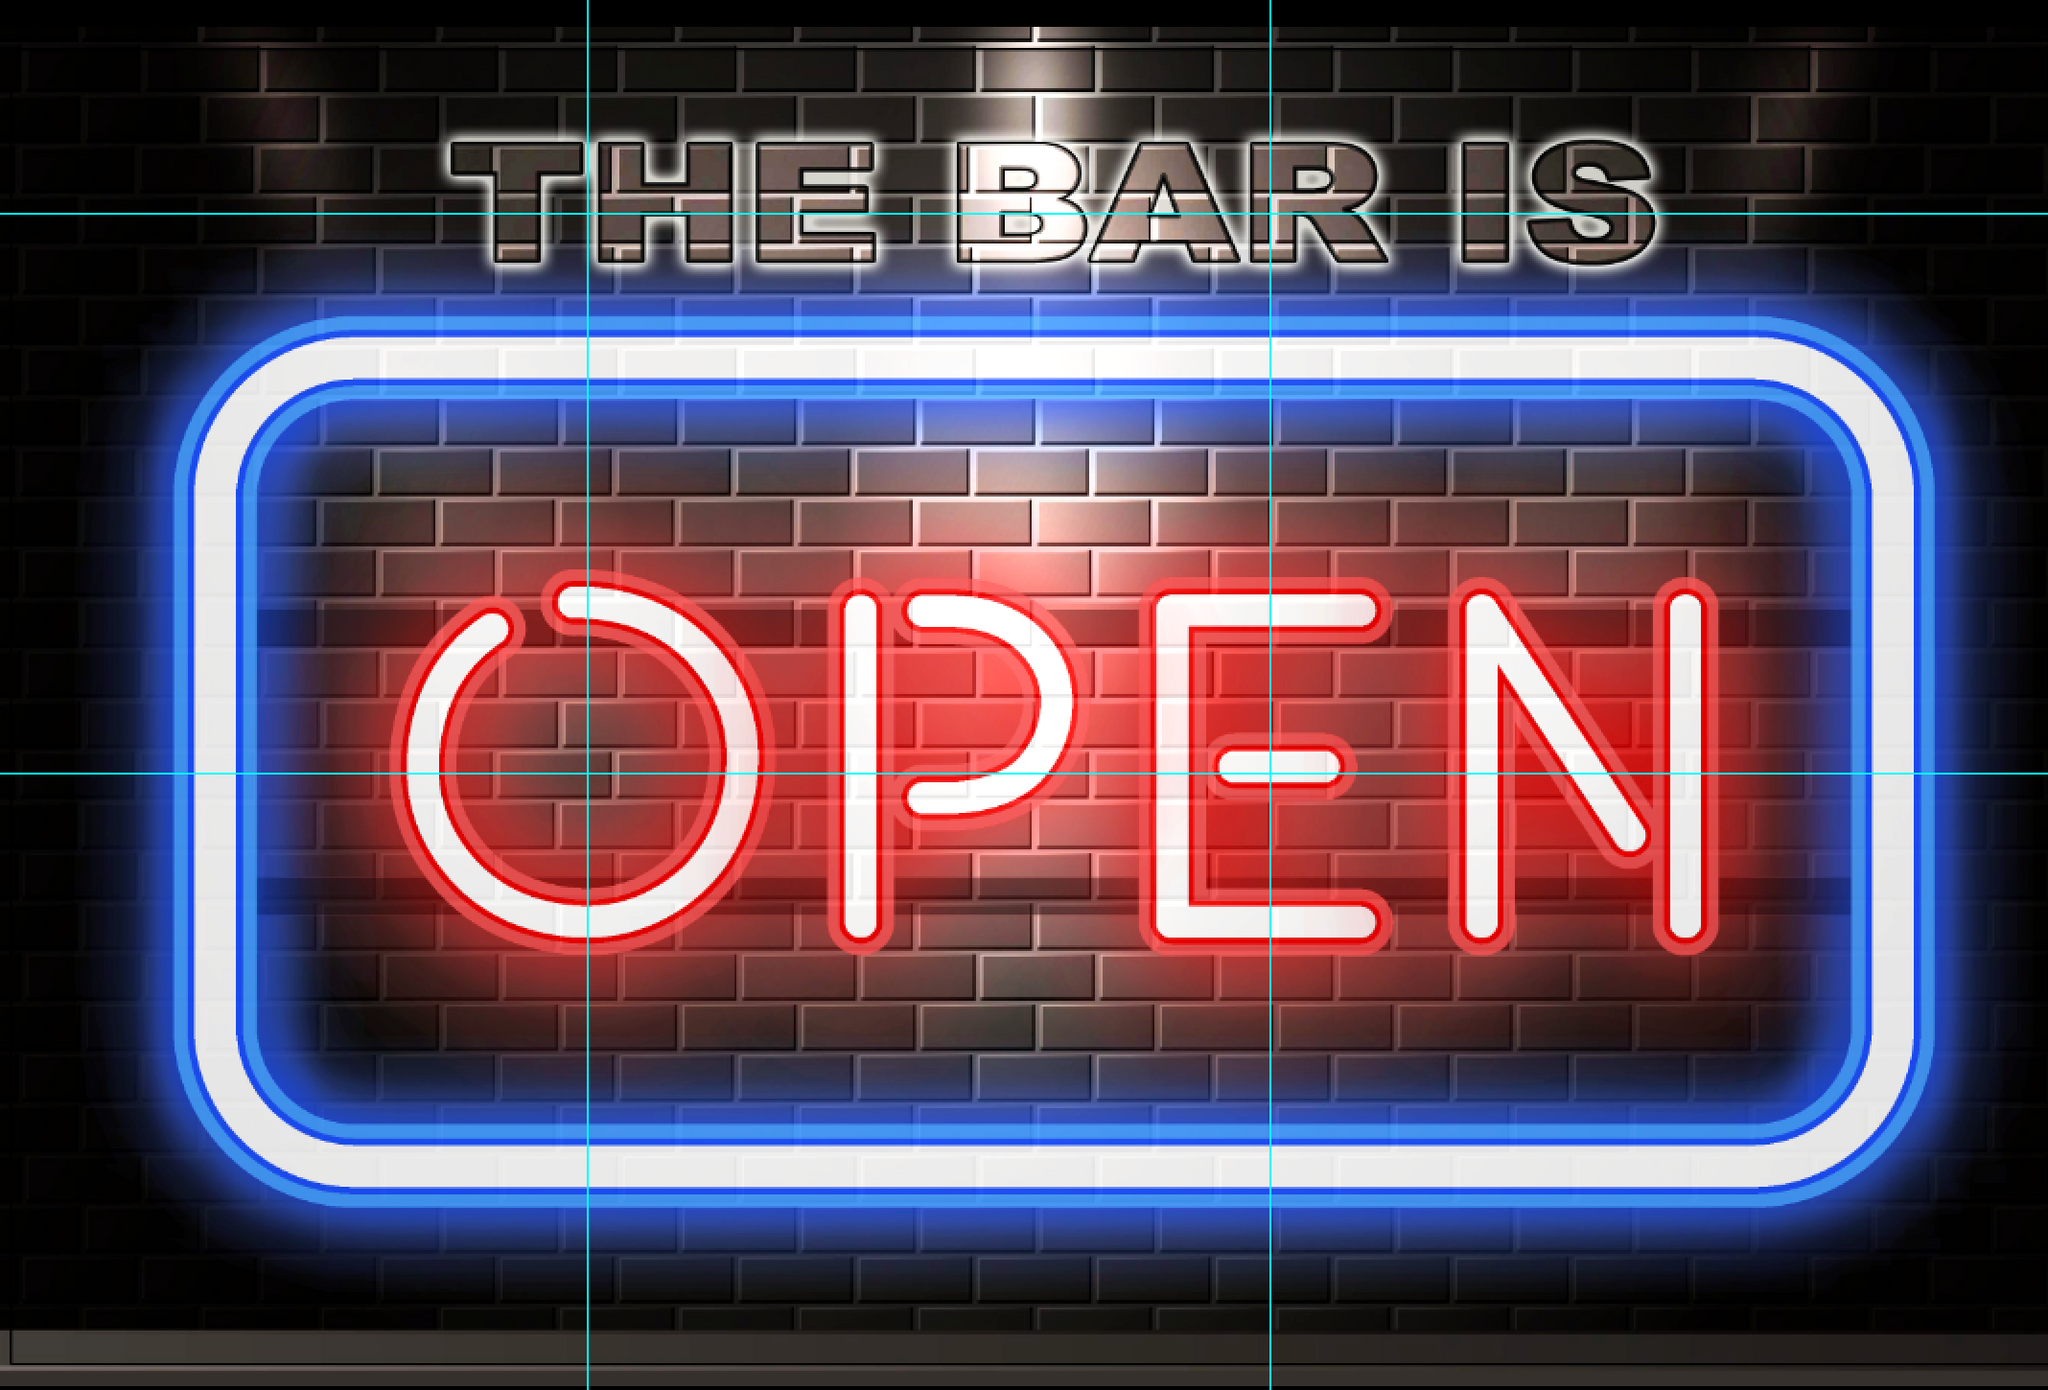 BAR IS NOW OPEN SIGN for Jonathan Sweeney